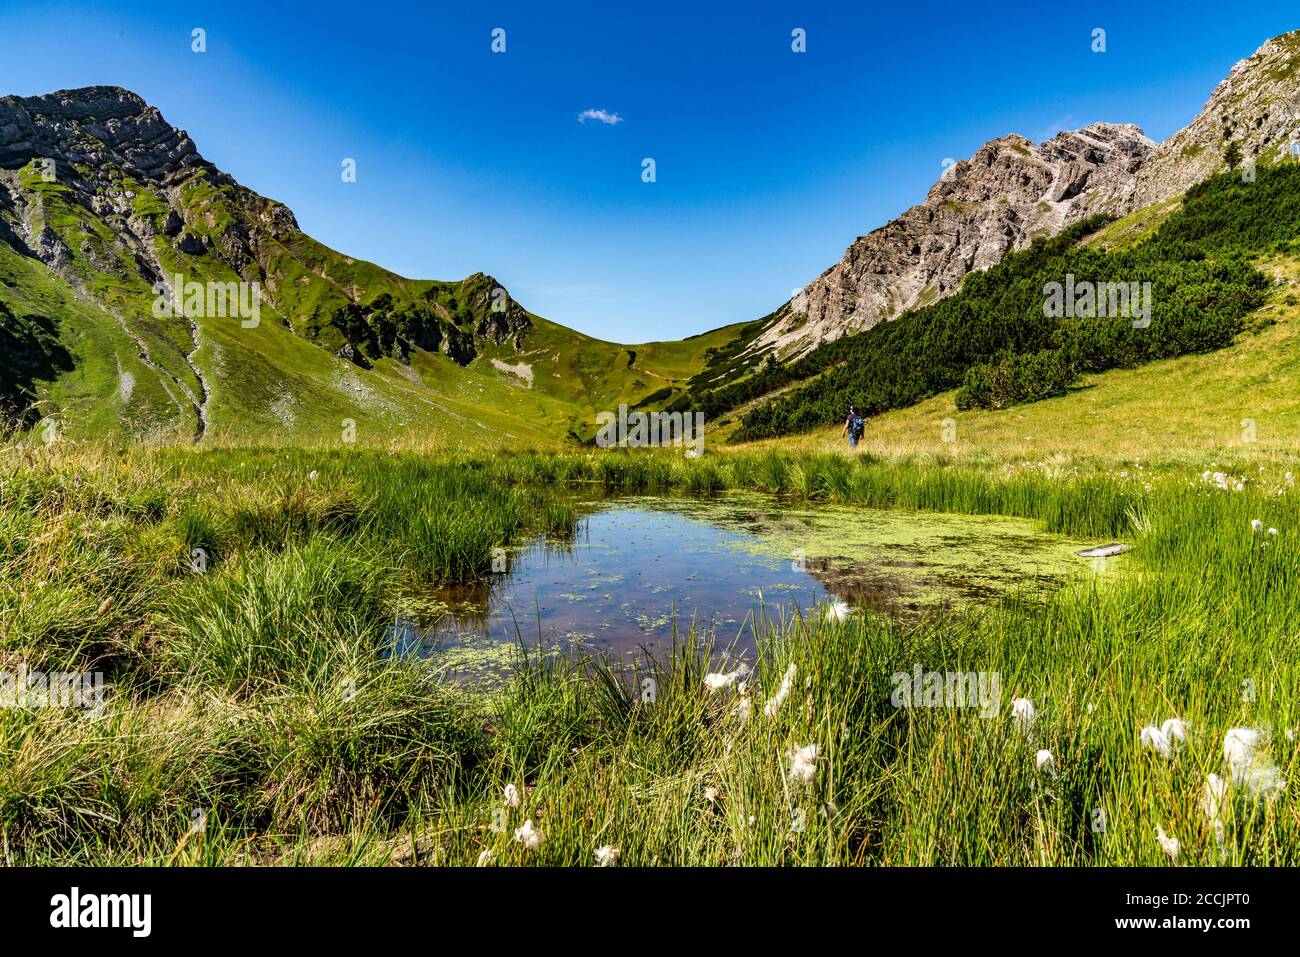 Himmel High Resolution Stock Photography and Images - Alamy